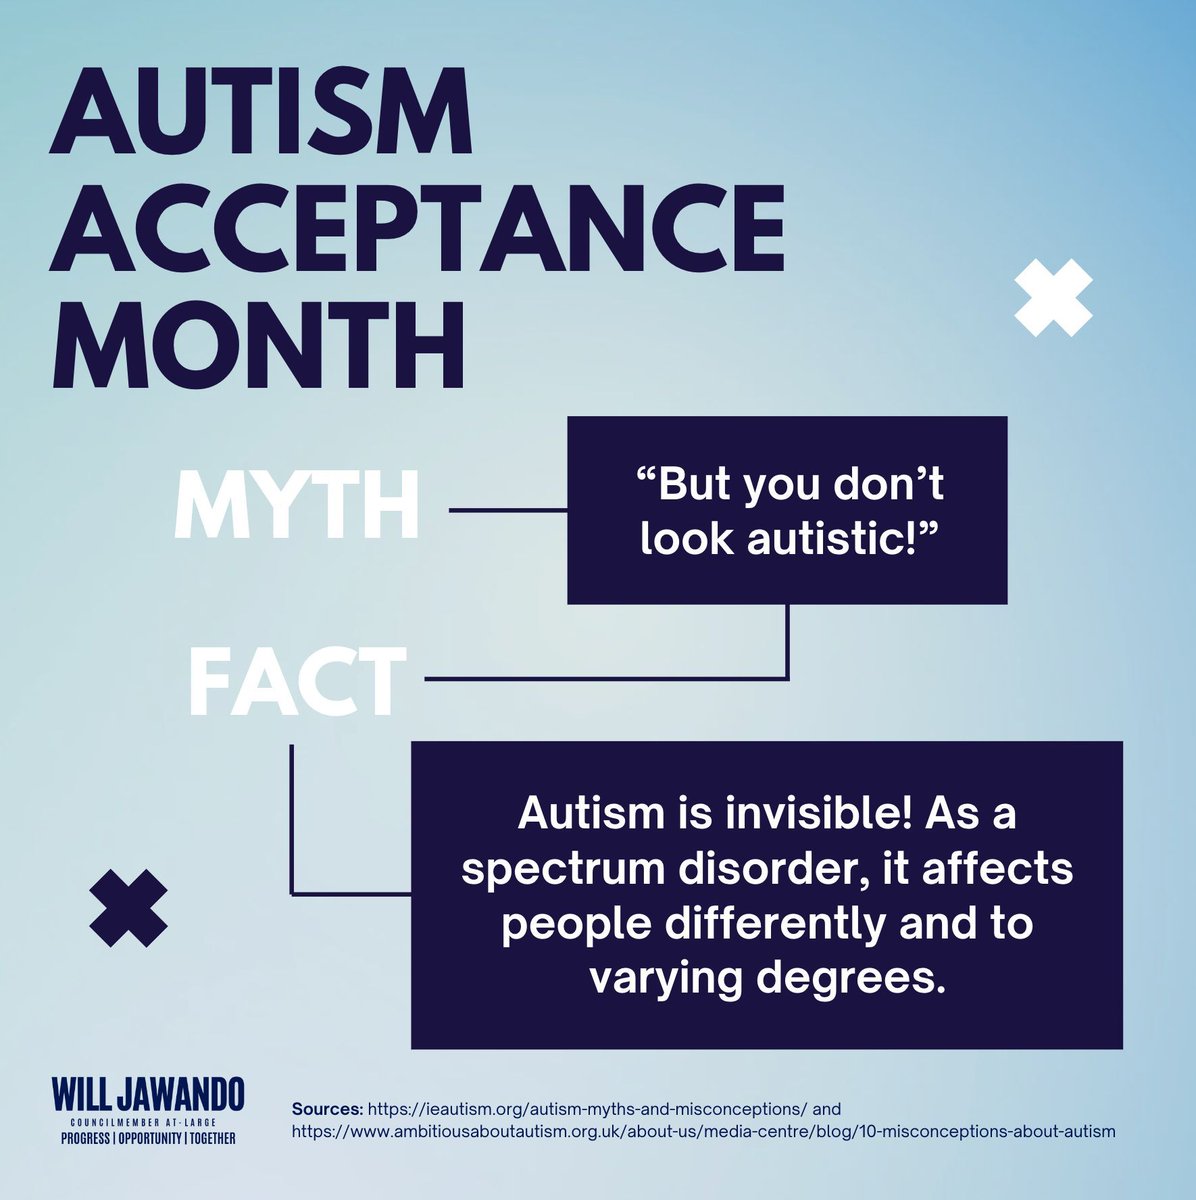 People often misunderstand and stereotype autism, making it harder for our neurodiverse community to thrive. Don't let misconceptions about autism keep you from being a better neighbor, employer, caregiver, or friend. More: autismsociety.org/the-autism-exp… #AutismAcceptance #mythbusters